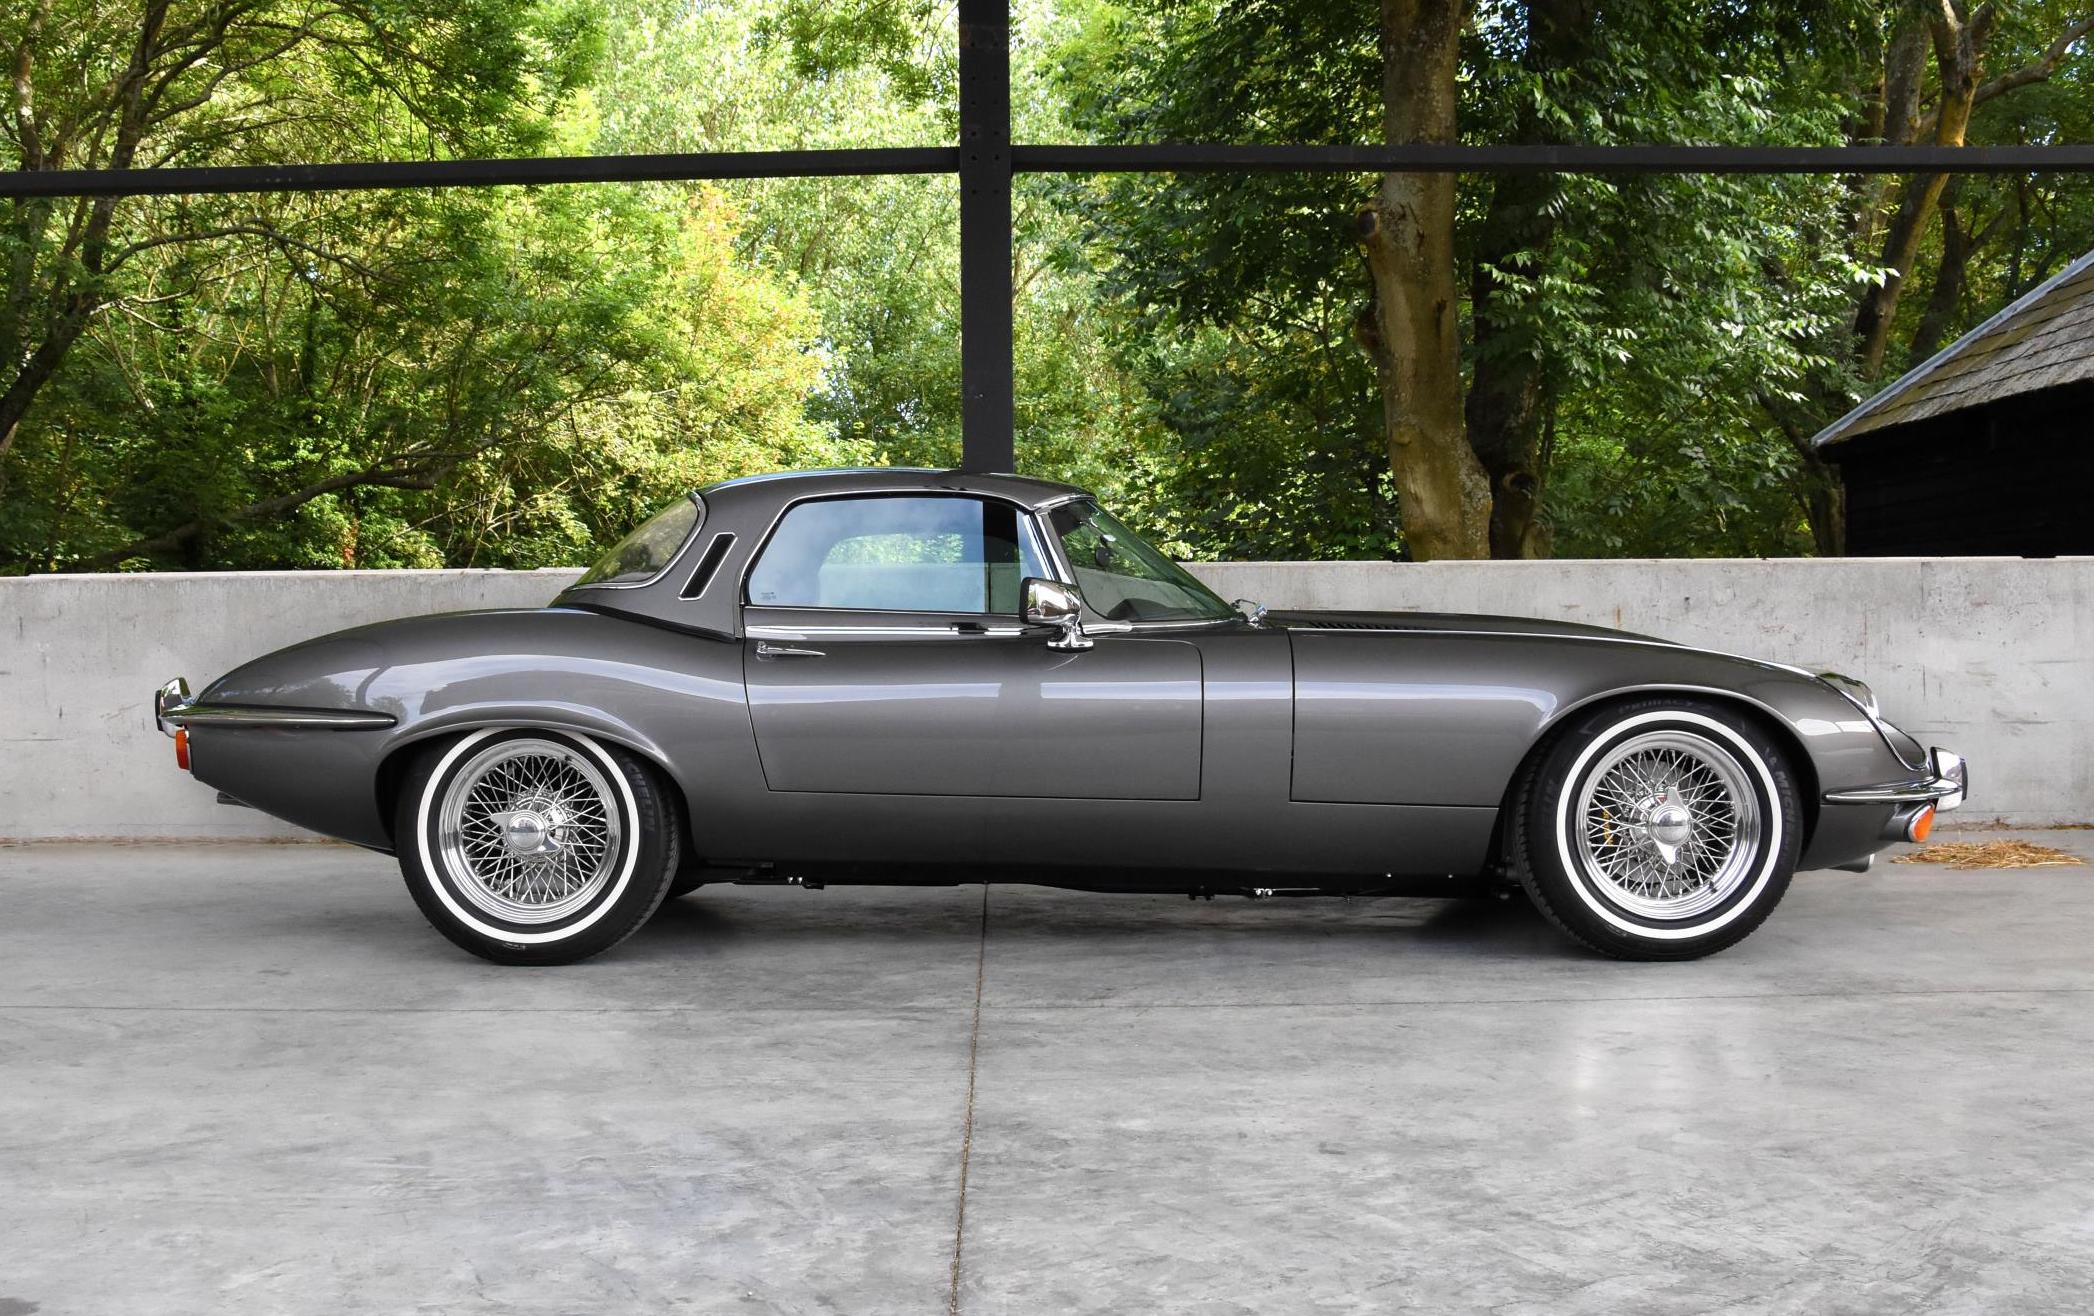 1974 Jaguar E-Type restored beautifully with 6.1L V12